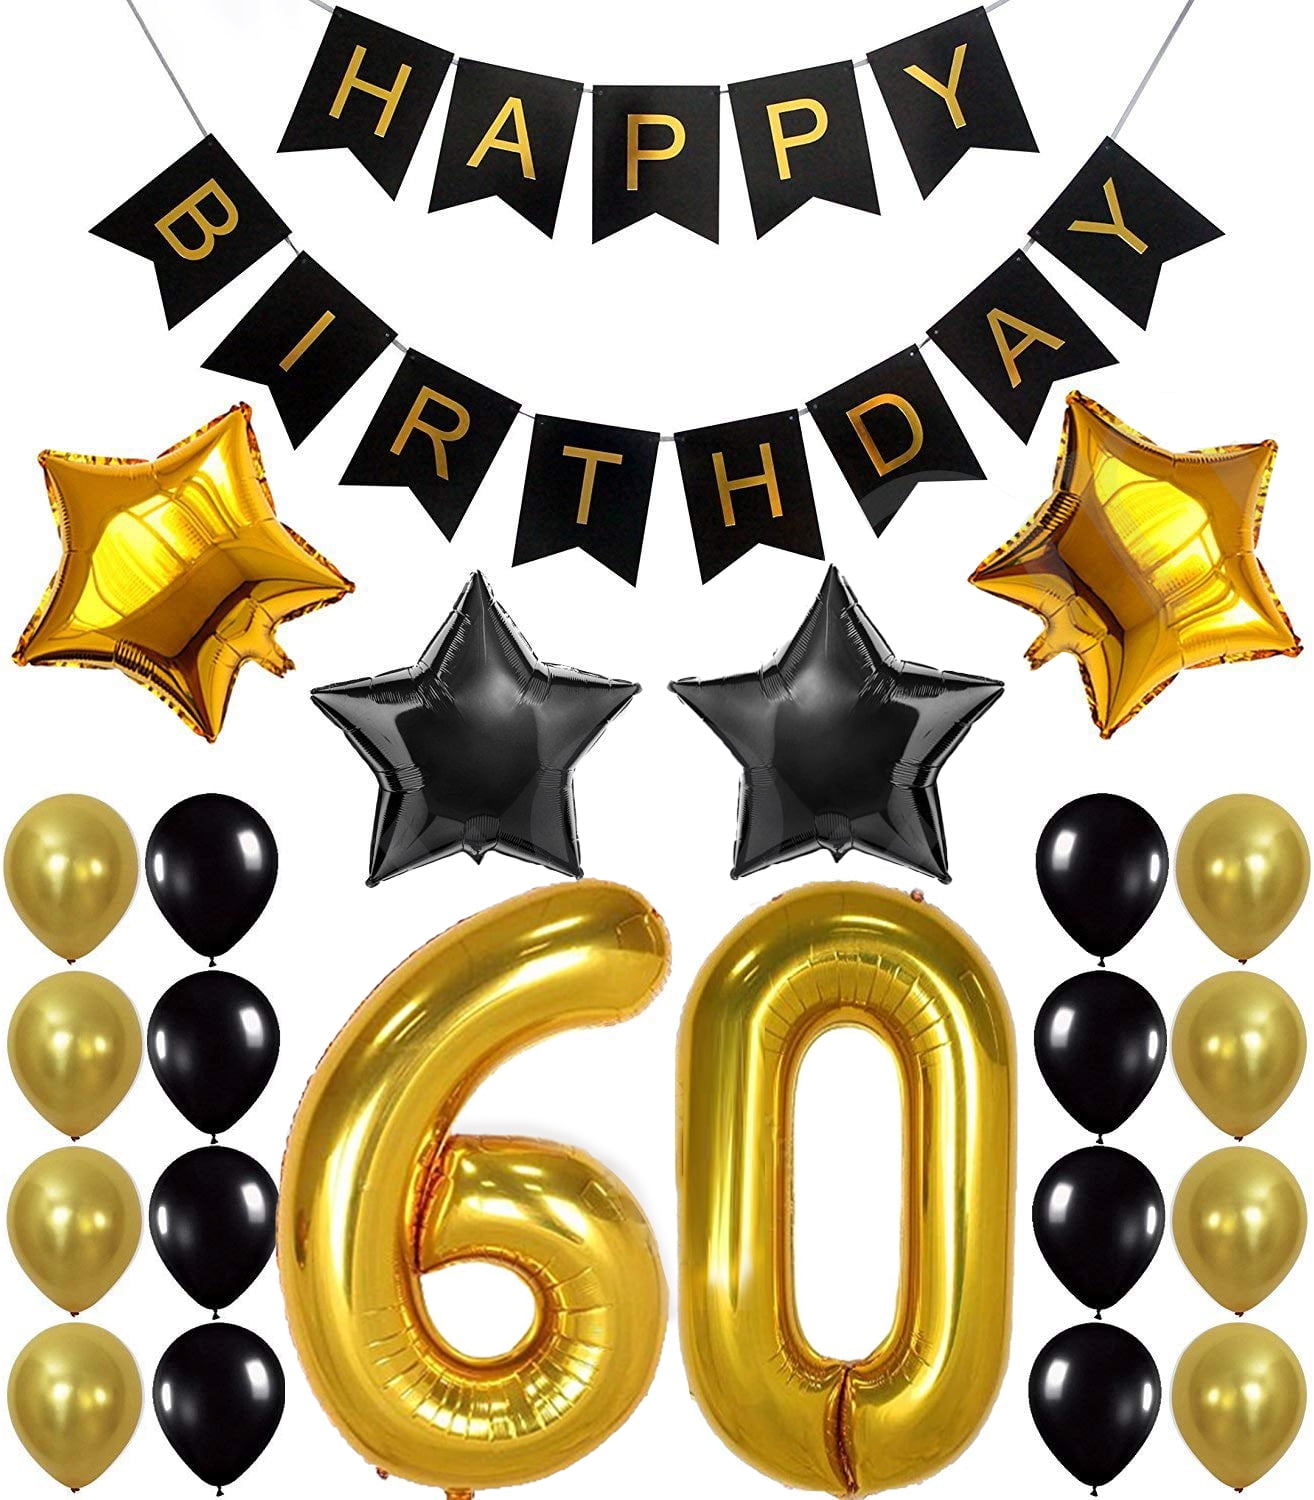 60th Birthday Party Supplies 60th Birthday Gifts 60th Birthday Can Coolers 60th Birthday Gifts for Men 60th Birthday Decorations for Men 60th Birthday Favors 60th Birthday Party Favors 